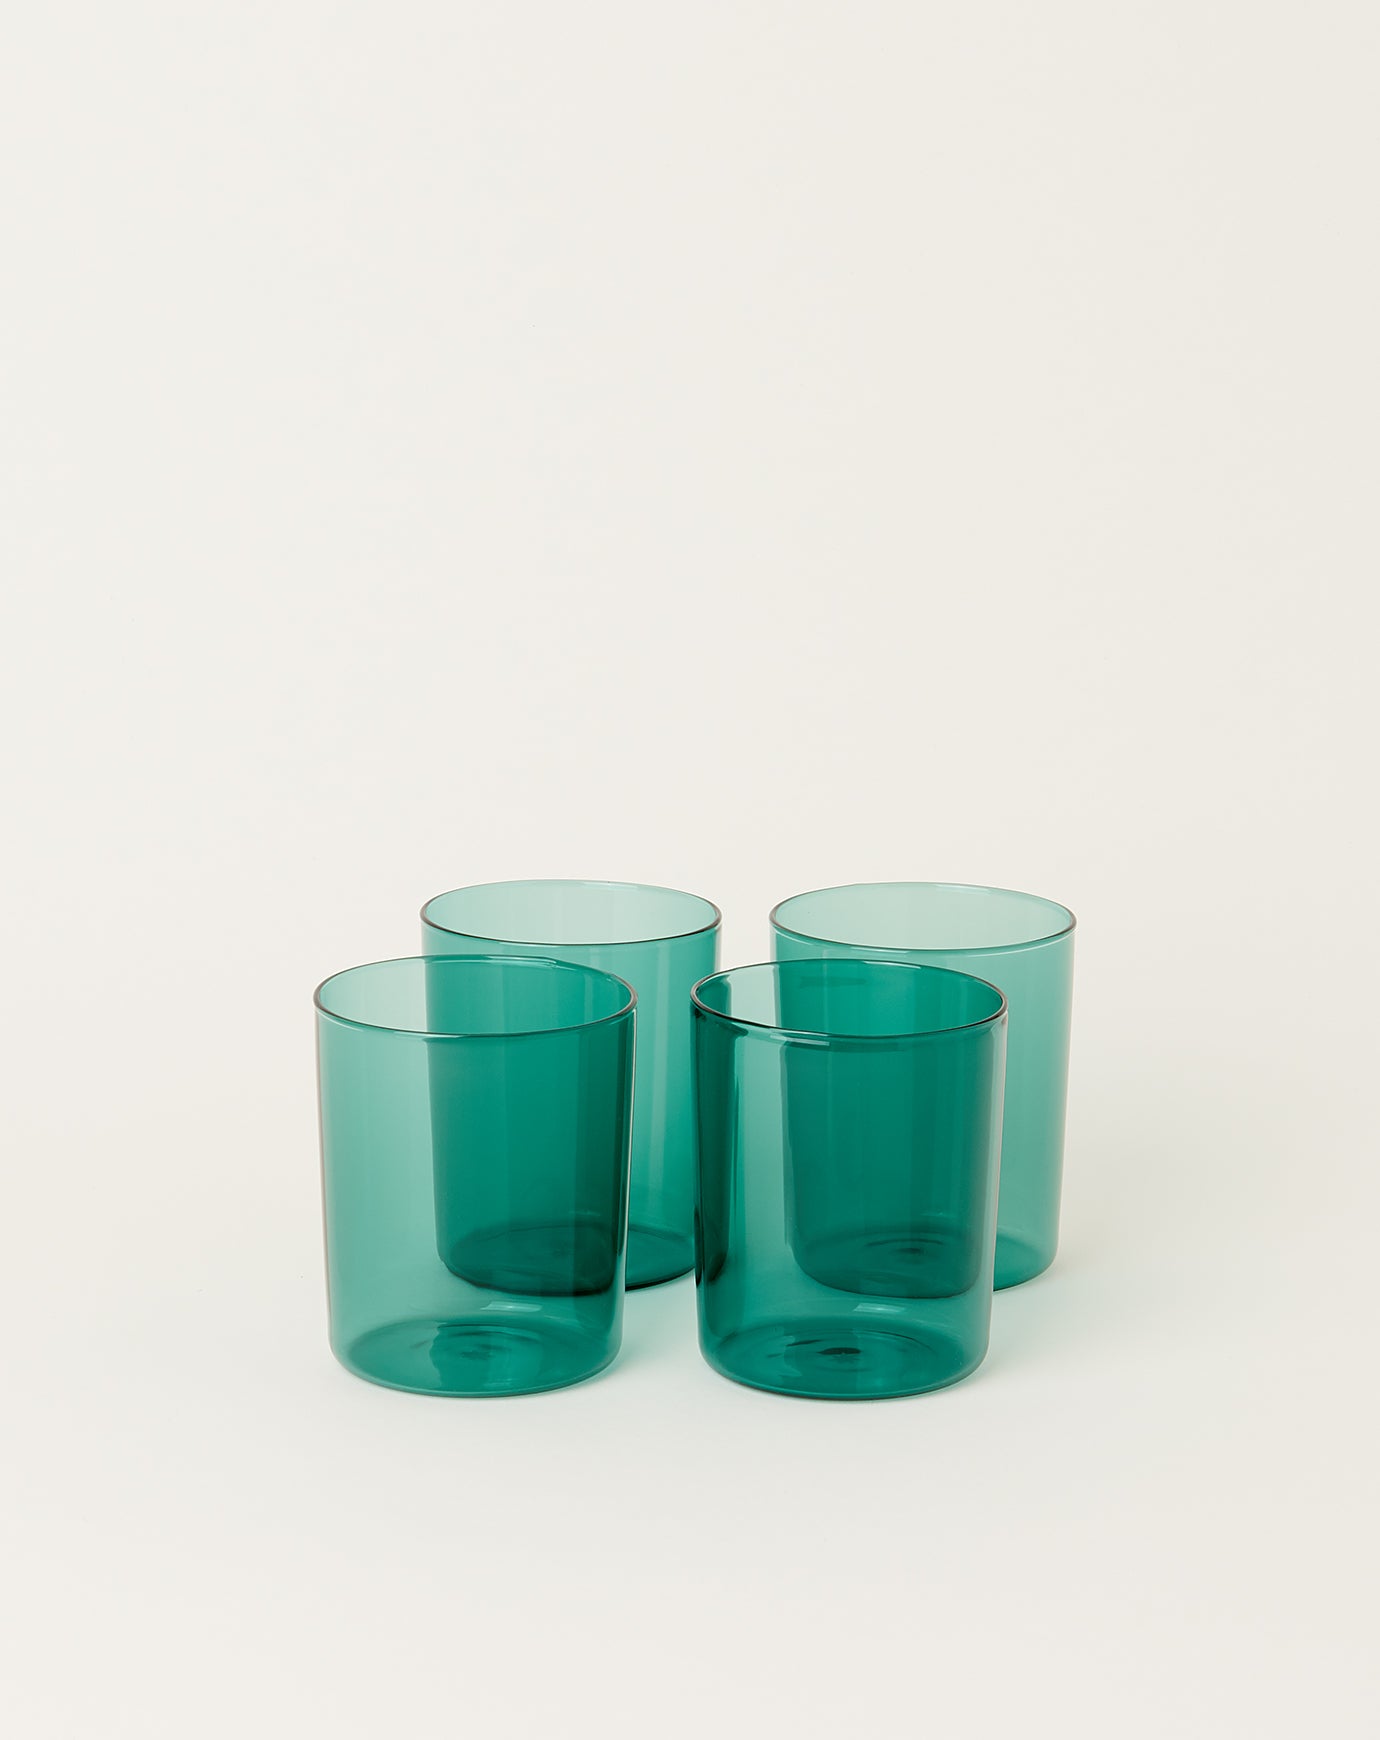 Maison Balzac Set of 4 Goblets in Teal